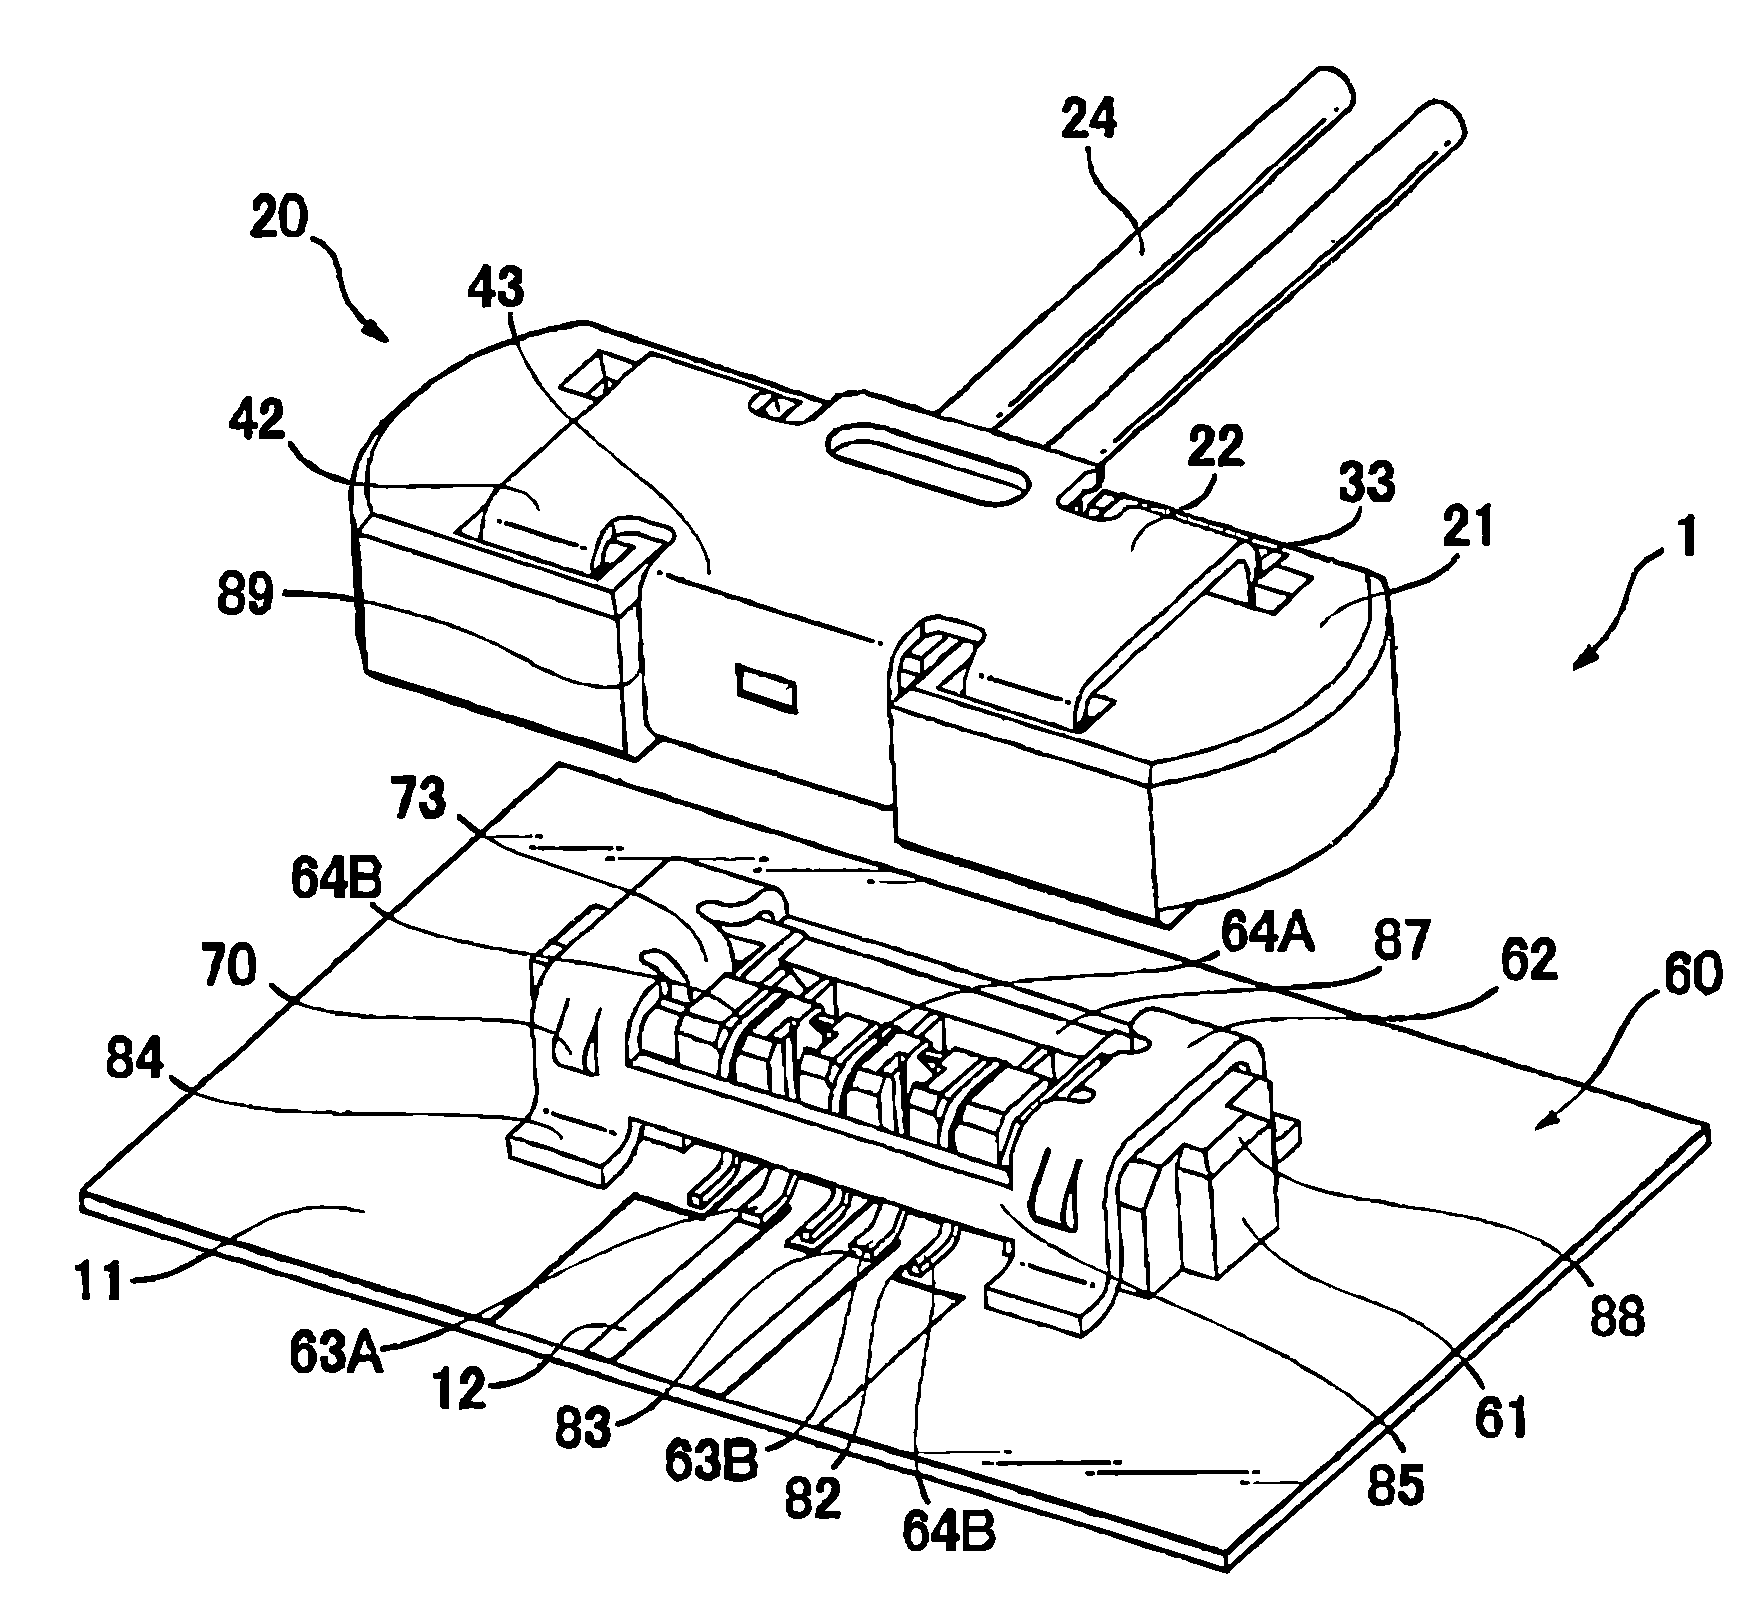 Connector device